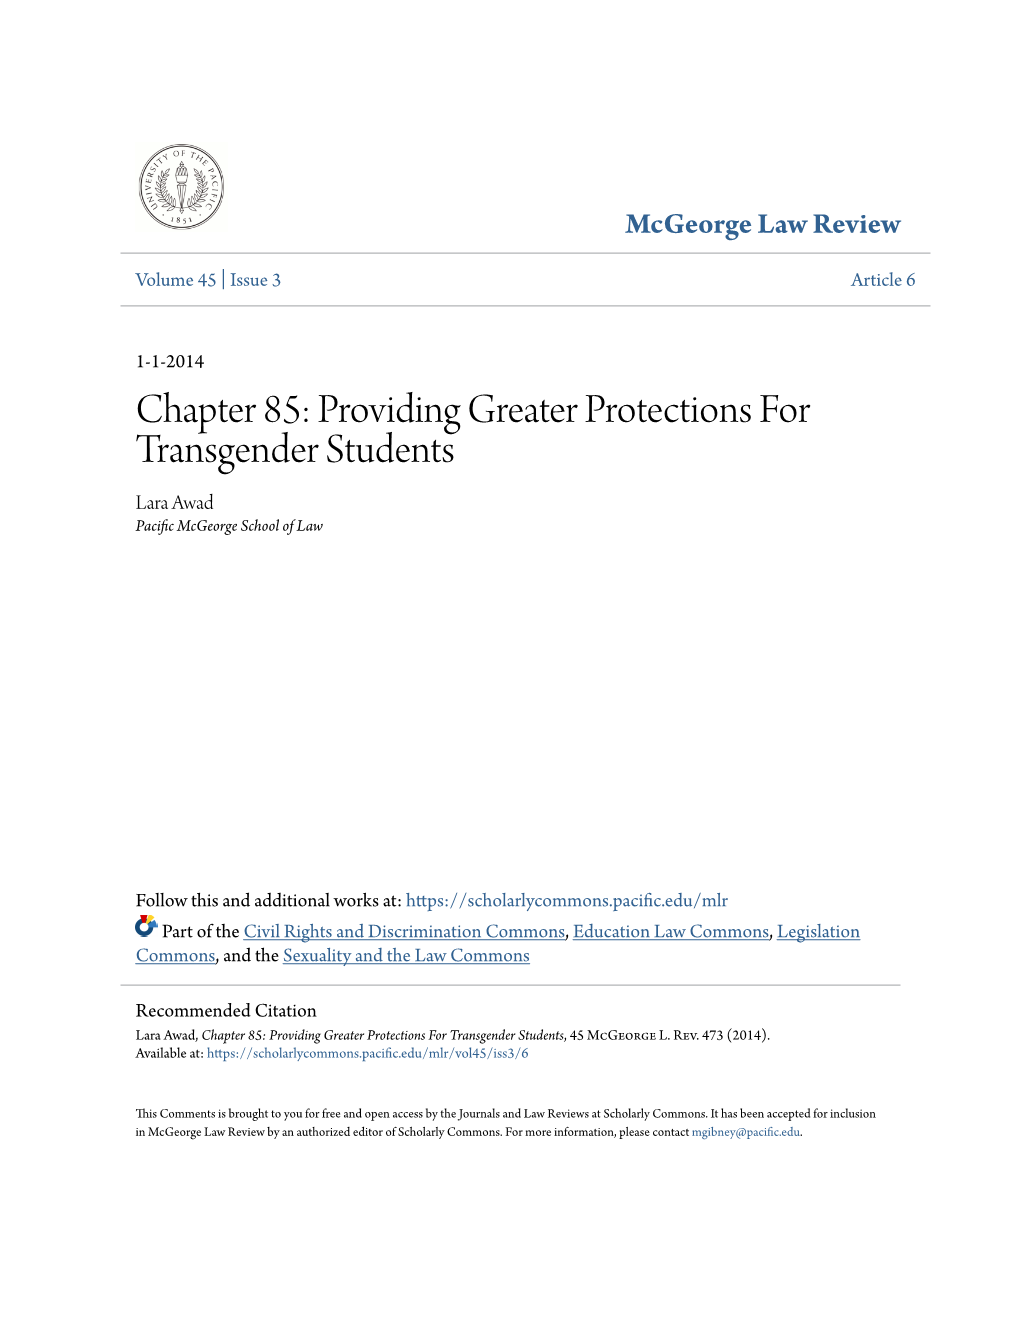 Providing Greater Protections for Transgender Students Lara Awad Pacific Cgem Orge School of Law